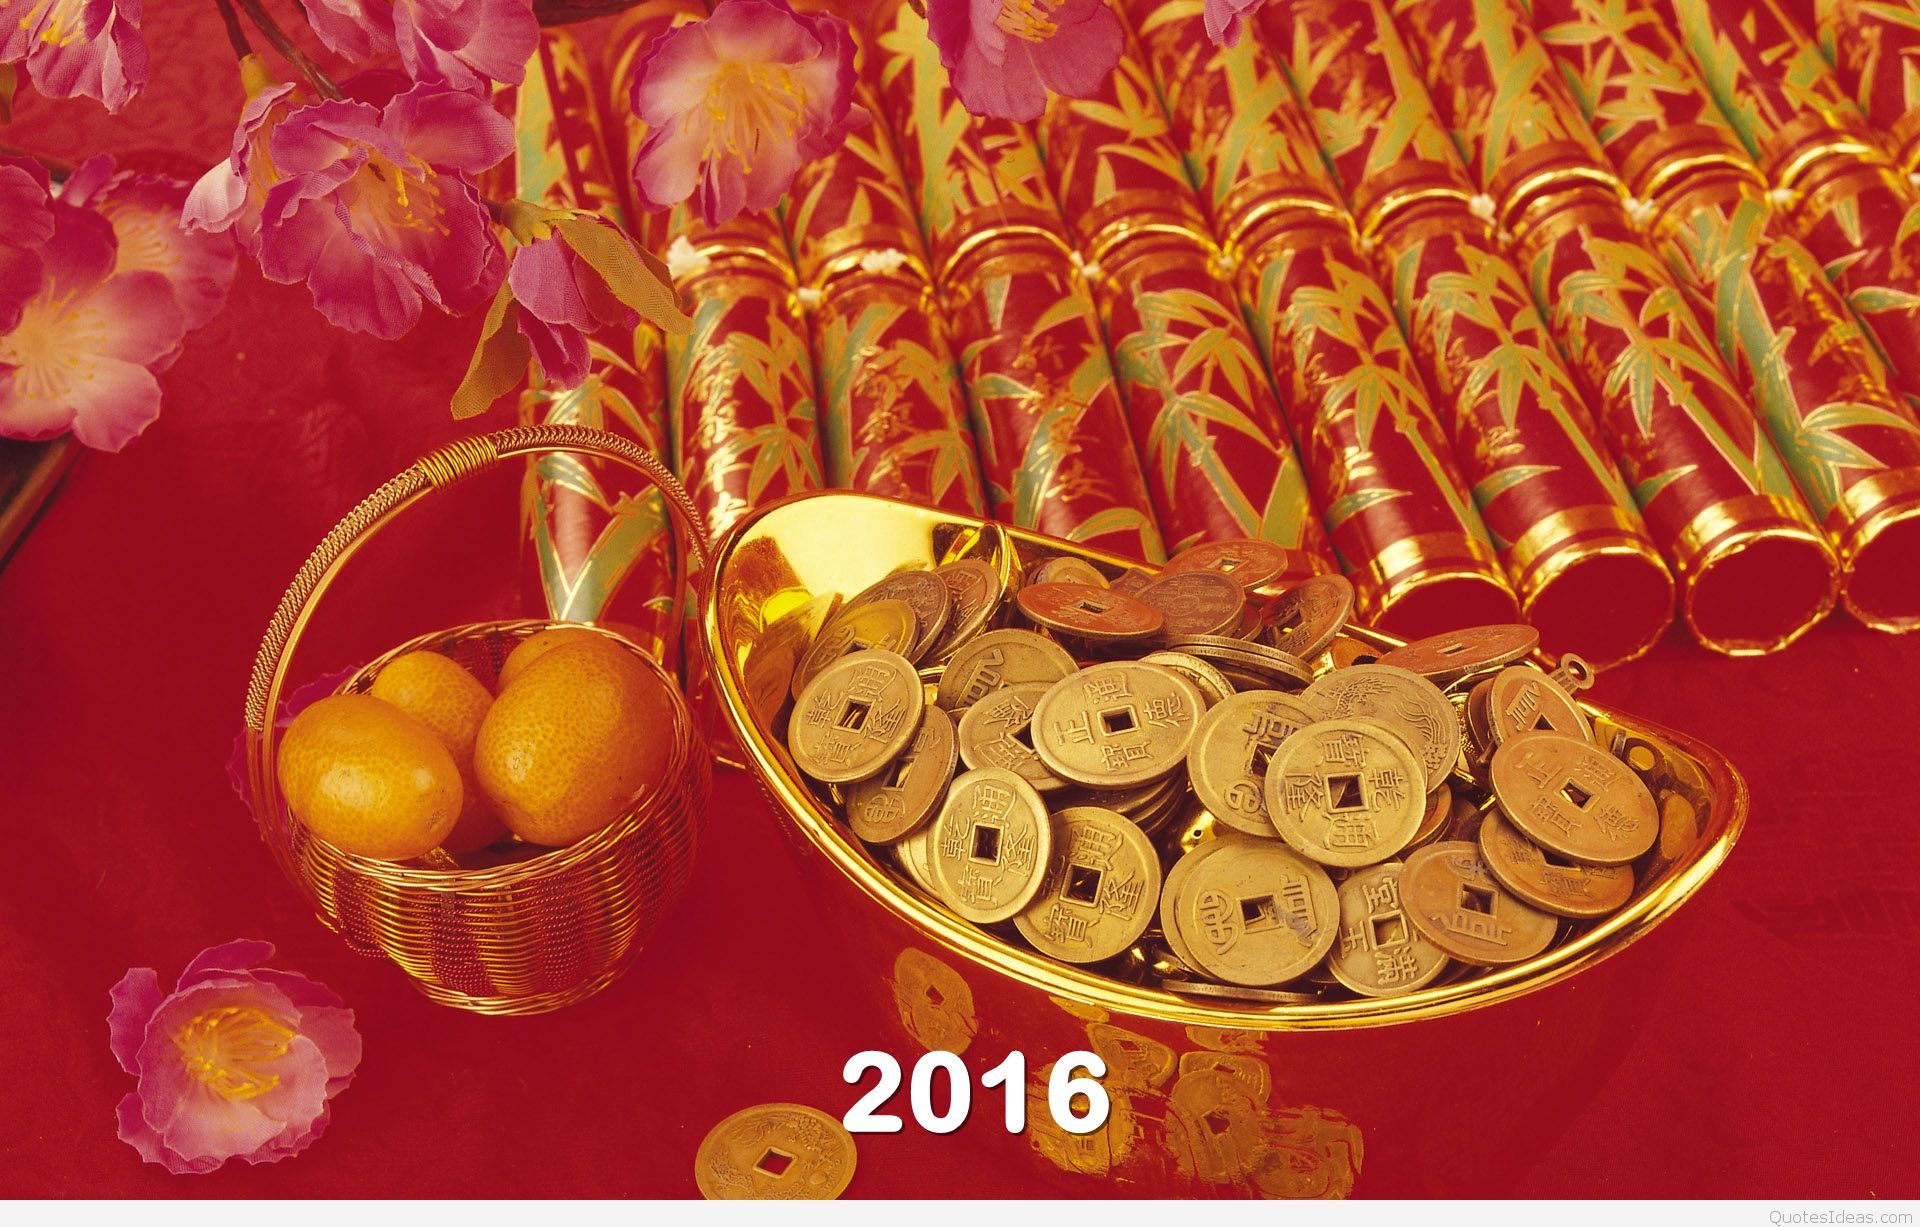 new year 2016 Wallpapers Images HD Download   Happy Chinese New Year